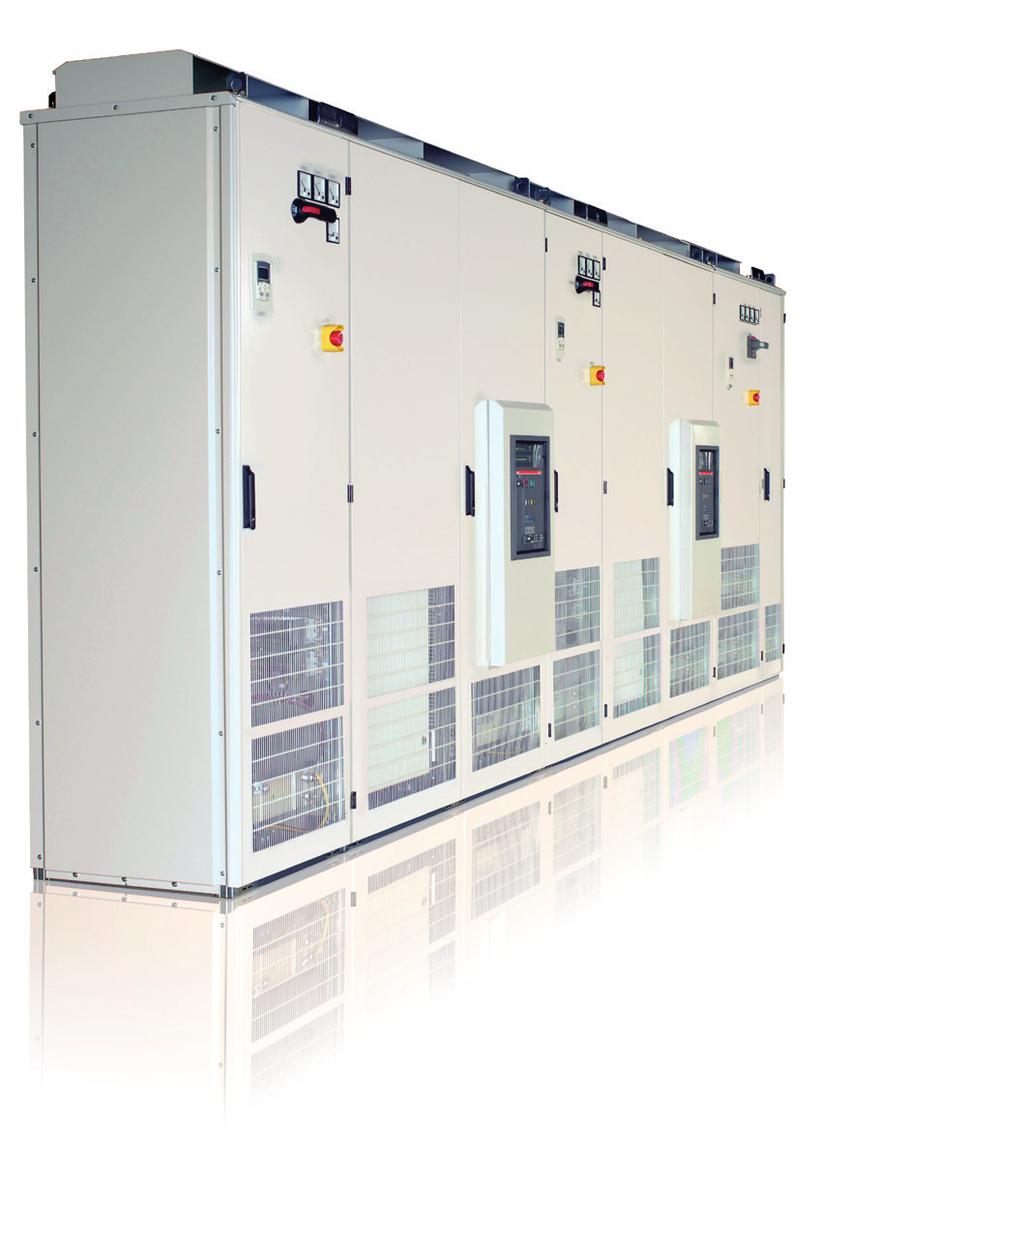 DCS800 Cabinet Drive 600 to 3,000 Hp DCS800-A0 cabinet drives, available from 600 to 3000 horsepower and beyond at voltages up to 1200 Vdc, provide optimal flexibility in a DC system for a wide